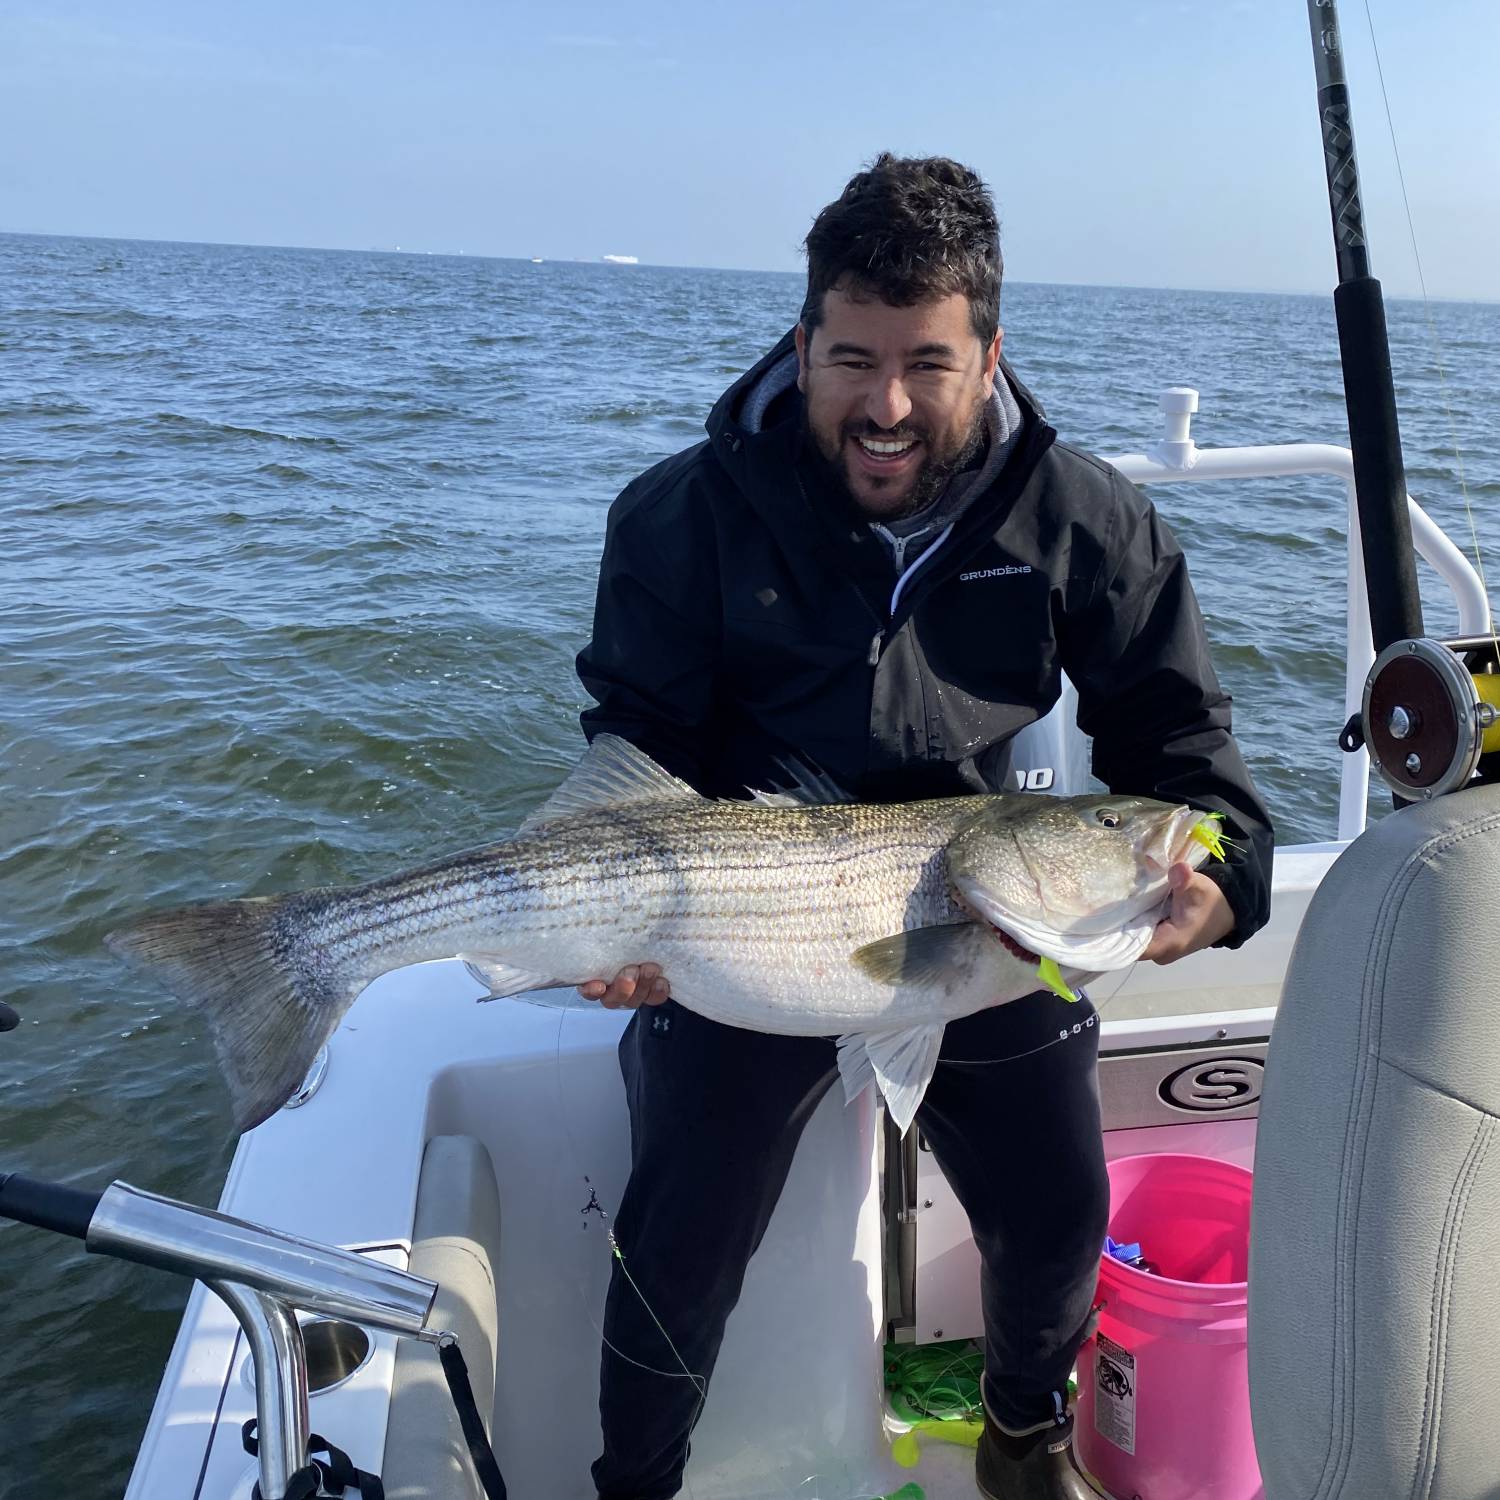 Title: 42 inch rockfish in the Chesapeake Bay - On board their Sportsman Open 232 Center Console - Location: Chesapeake Bay, MD. Participating in the Photo Contest #SportsmanMay